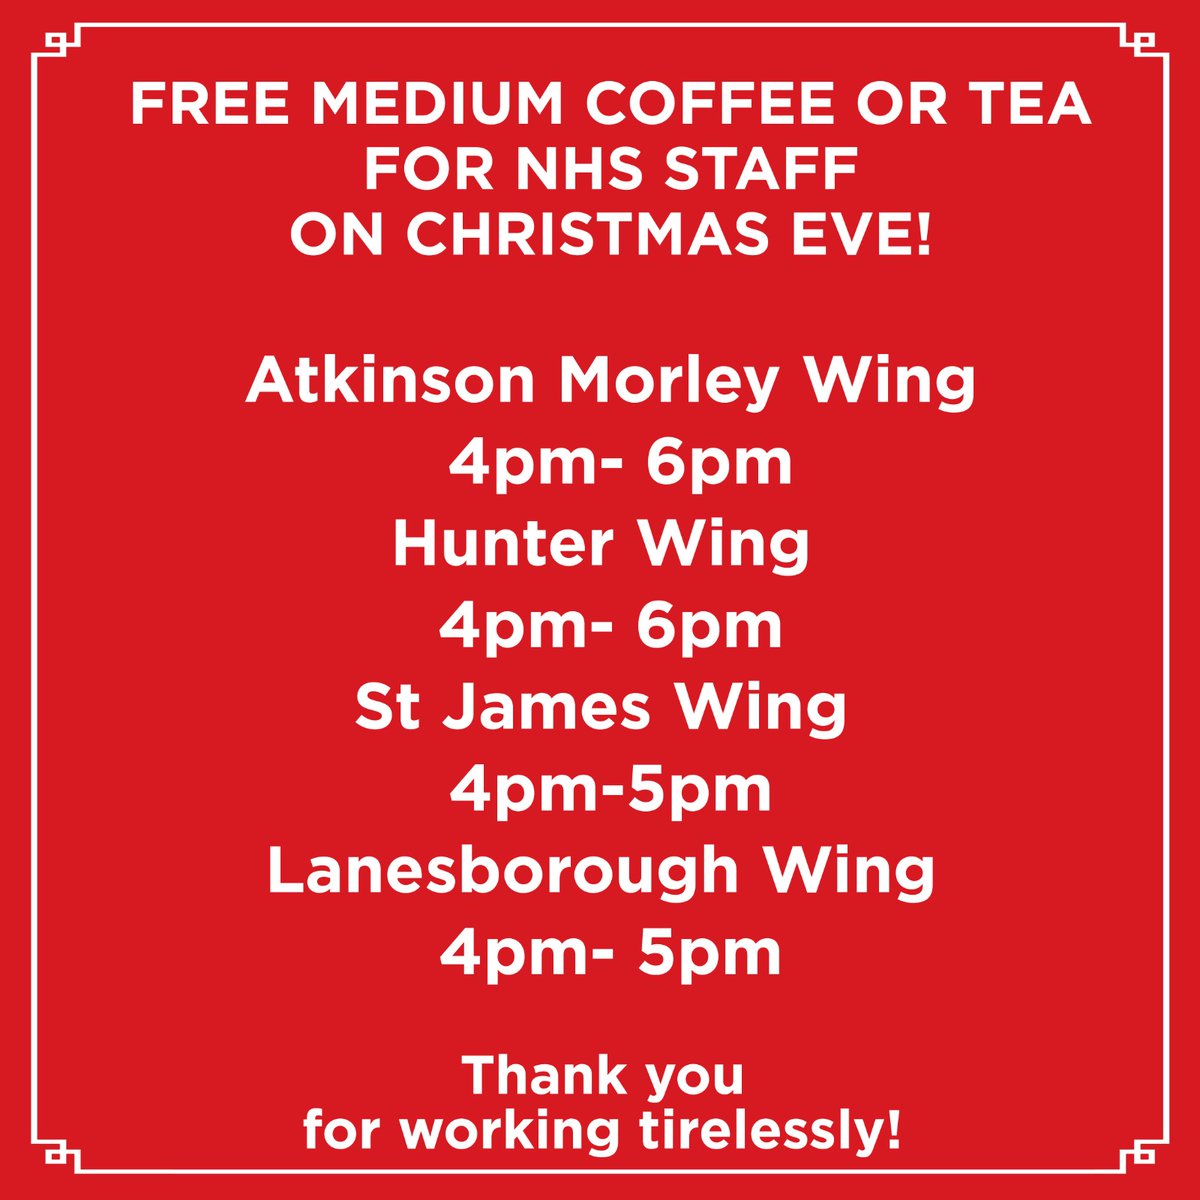 We would like to offer all NHS staff working on Christmas Eve at St Georges Hospital a free medium coffee or tea. 

Times and locations below. Merry Christmas. 🎄👨‍⚕️👩‍⚕️🎁

#Peabodyscoffee #Peabodys #NHS #workingatchristmas #instadoctor #instanurse #stgeorgeshospital